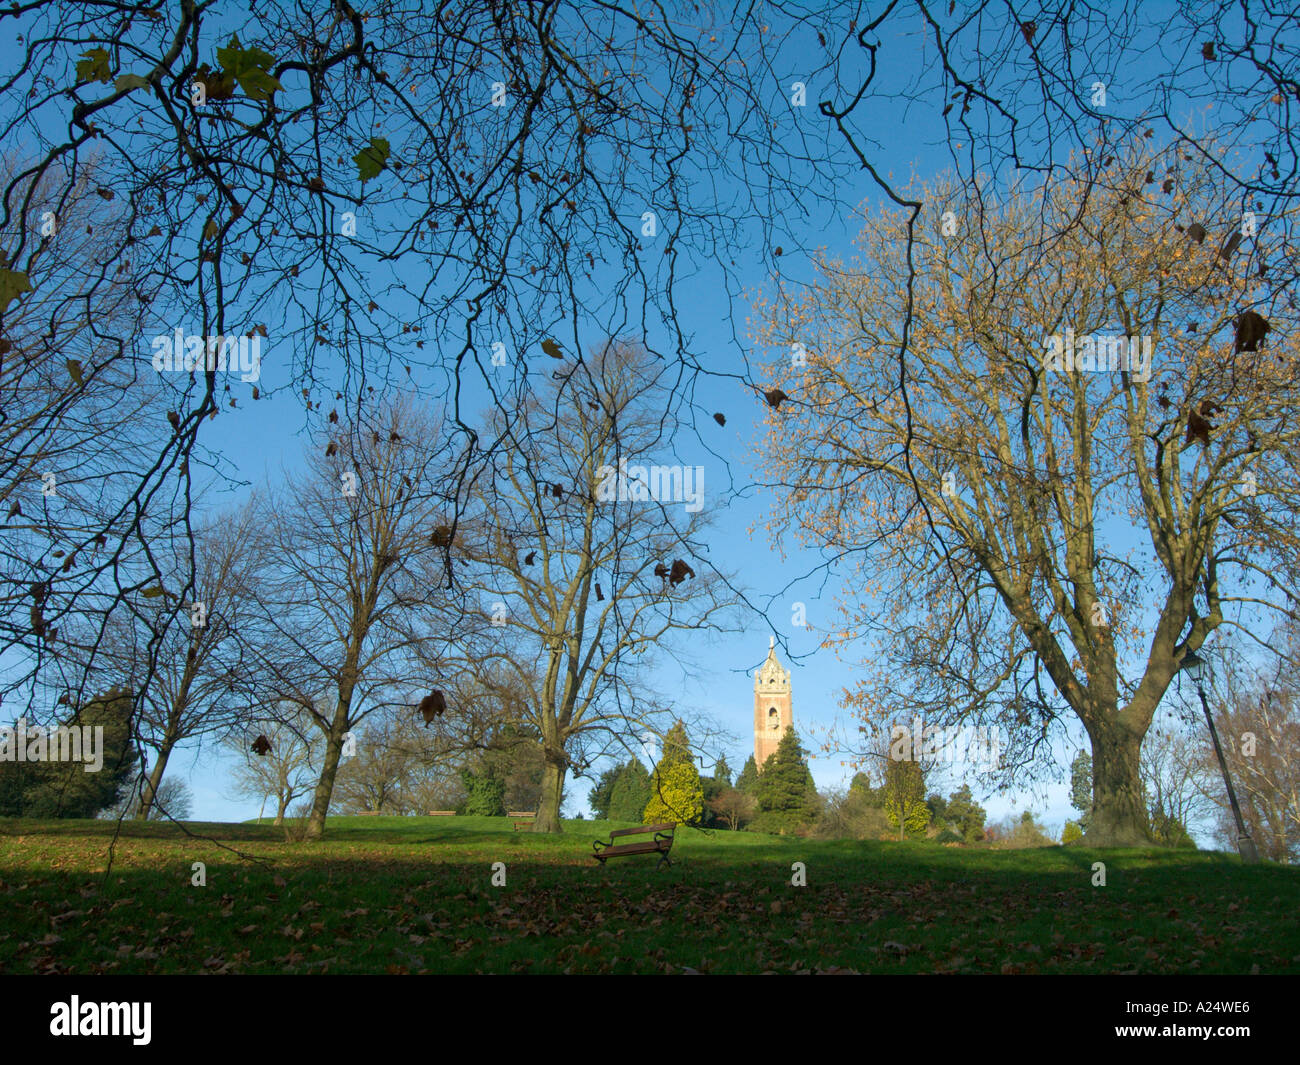 Brandon Hill Bristol view of Cabot Tower with London Plane trees in front Stock Photo